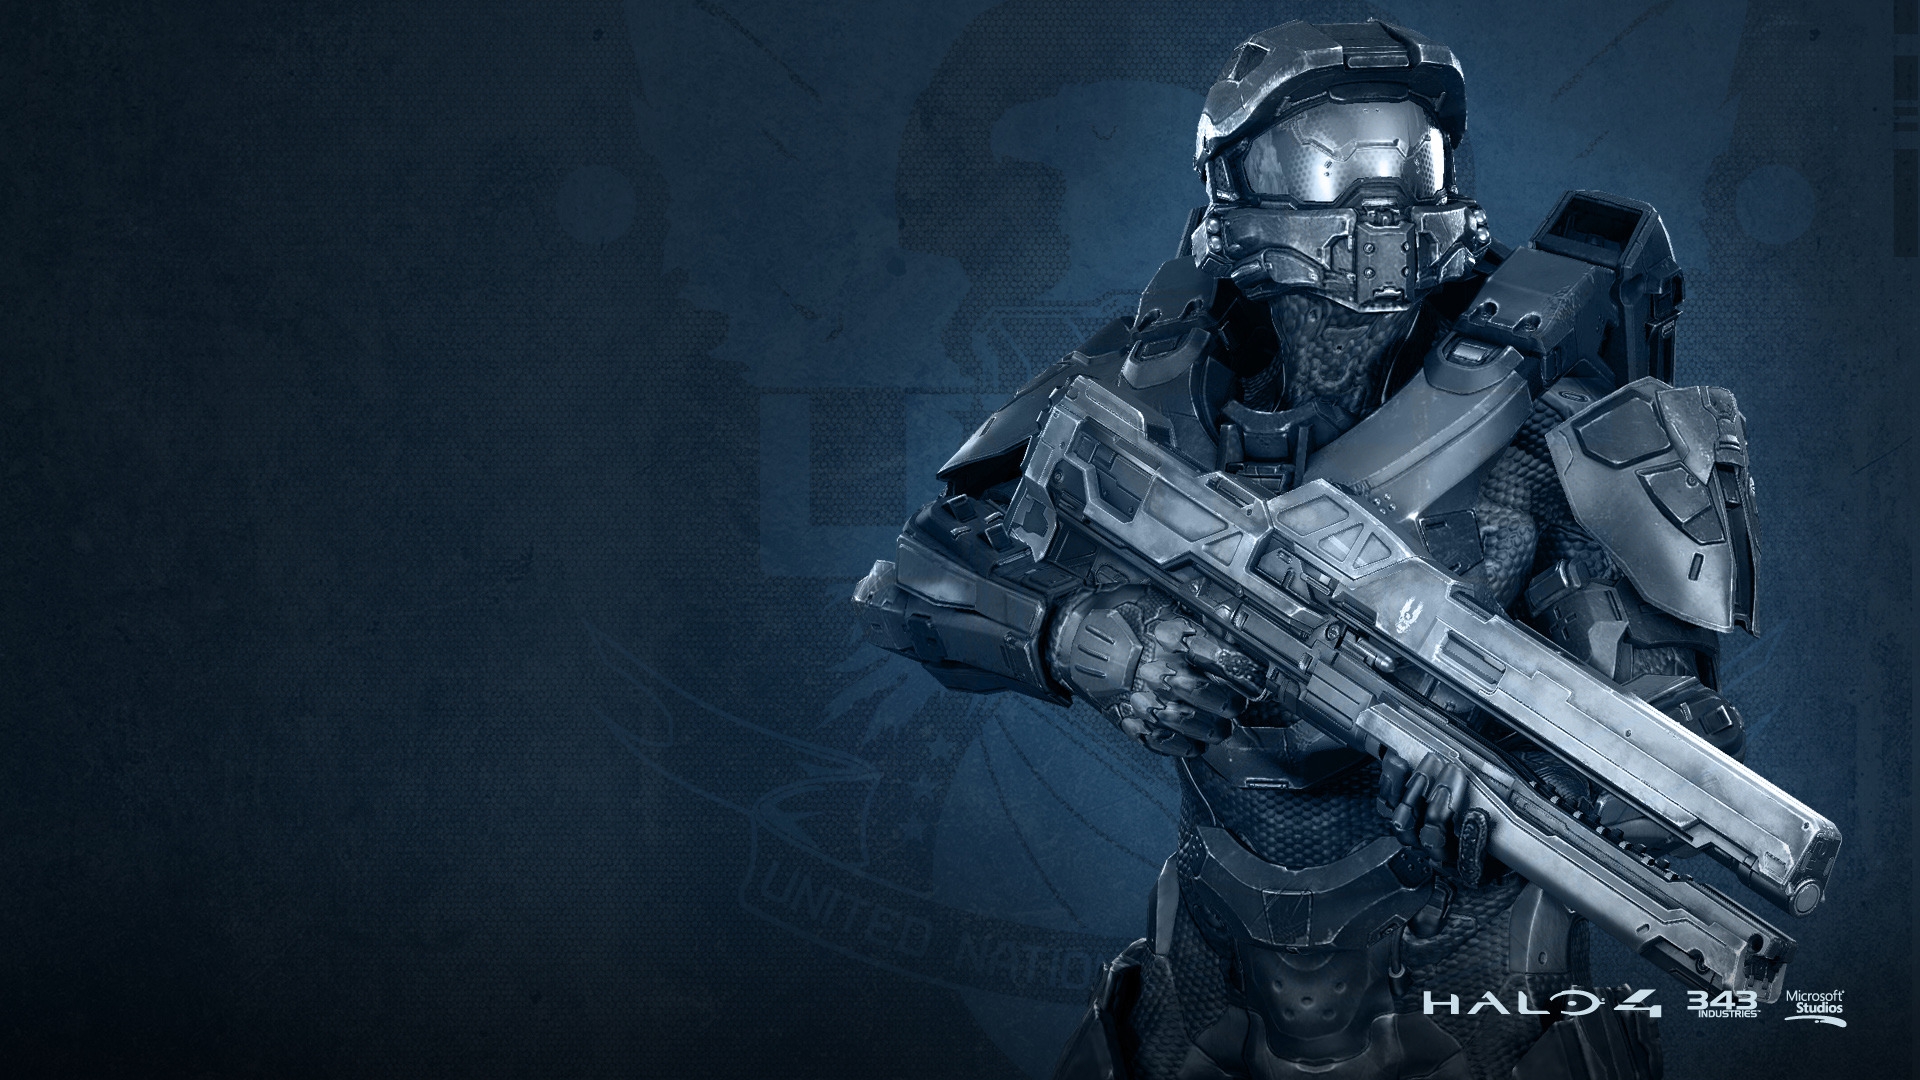 Master Chief Halo 4 for 1920 x 1080 HDTV 1080p resolution